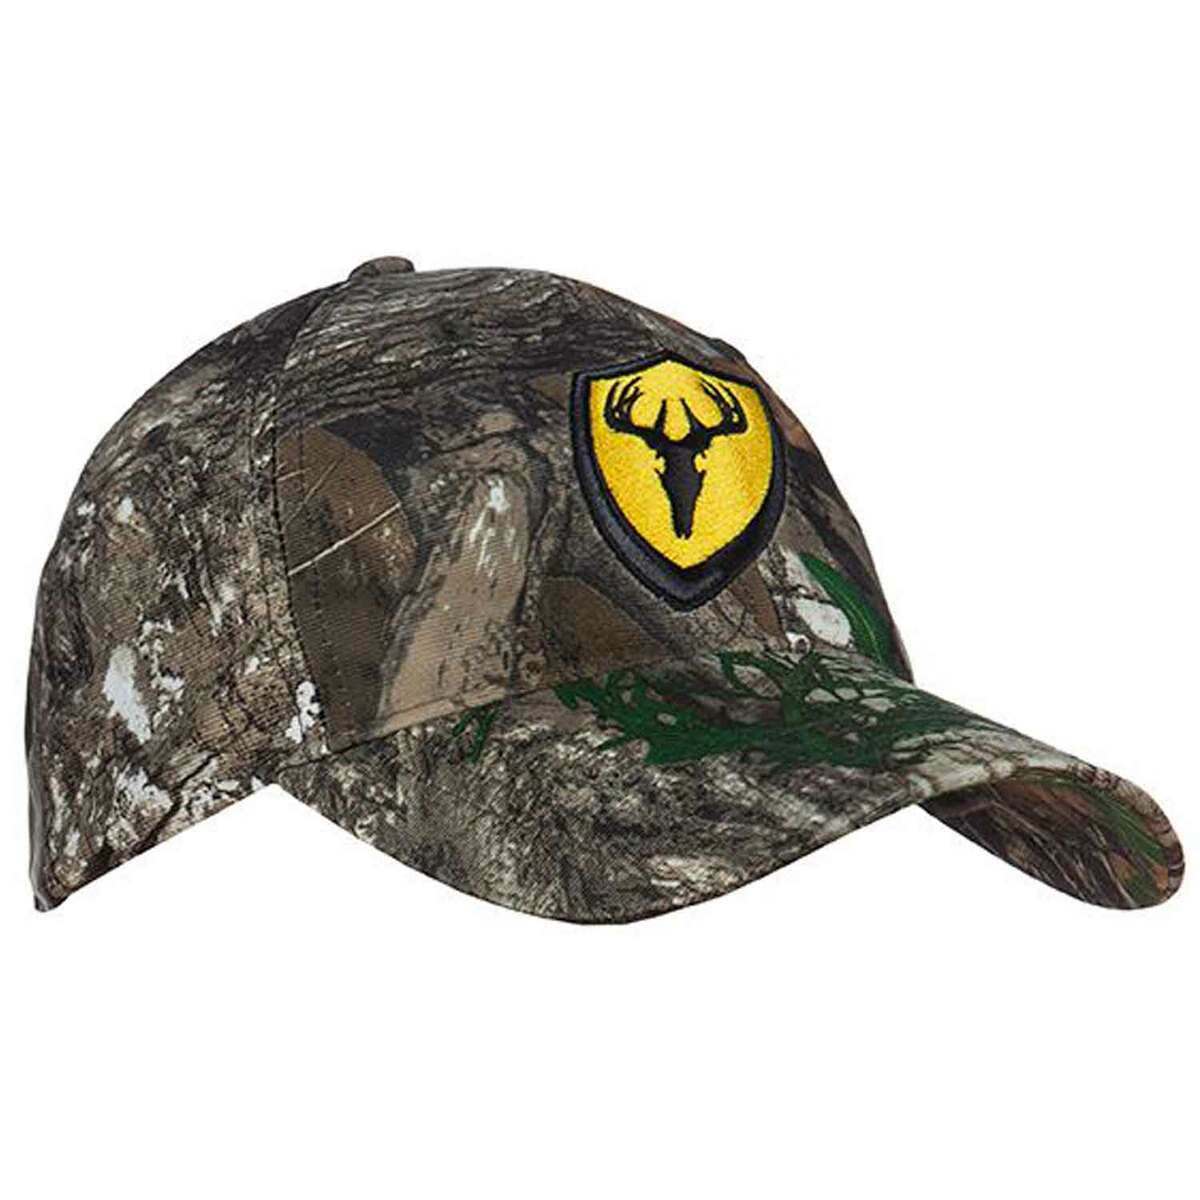  Banded Men's Hunting Camo Waxed B Logo Cap, Bottomland, One  Size : Sports & Outdoors